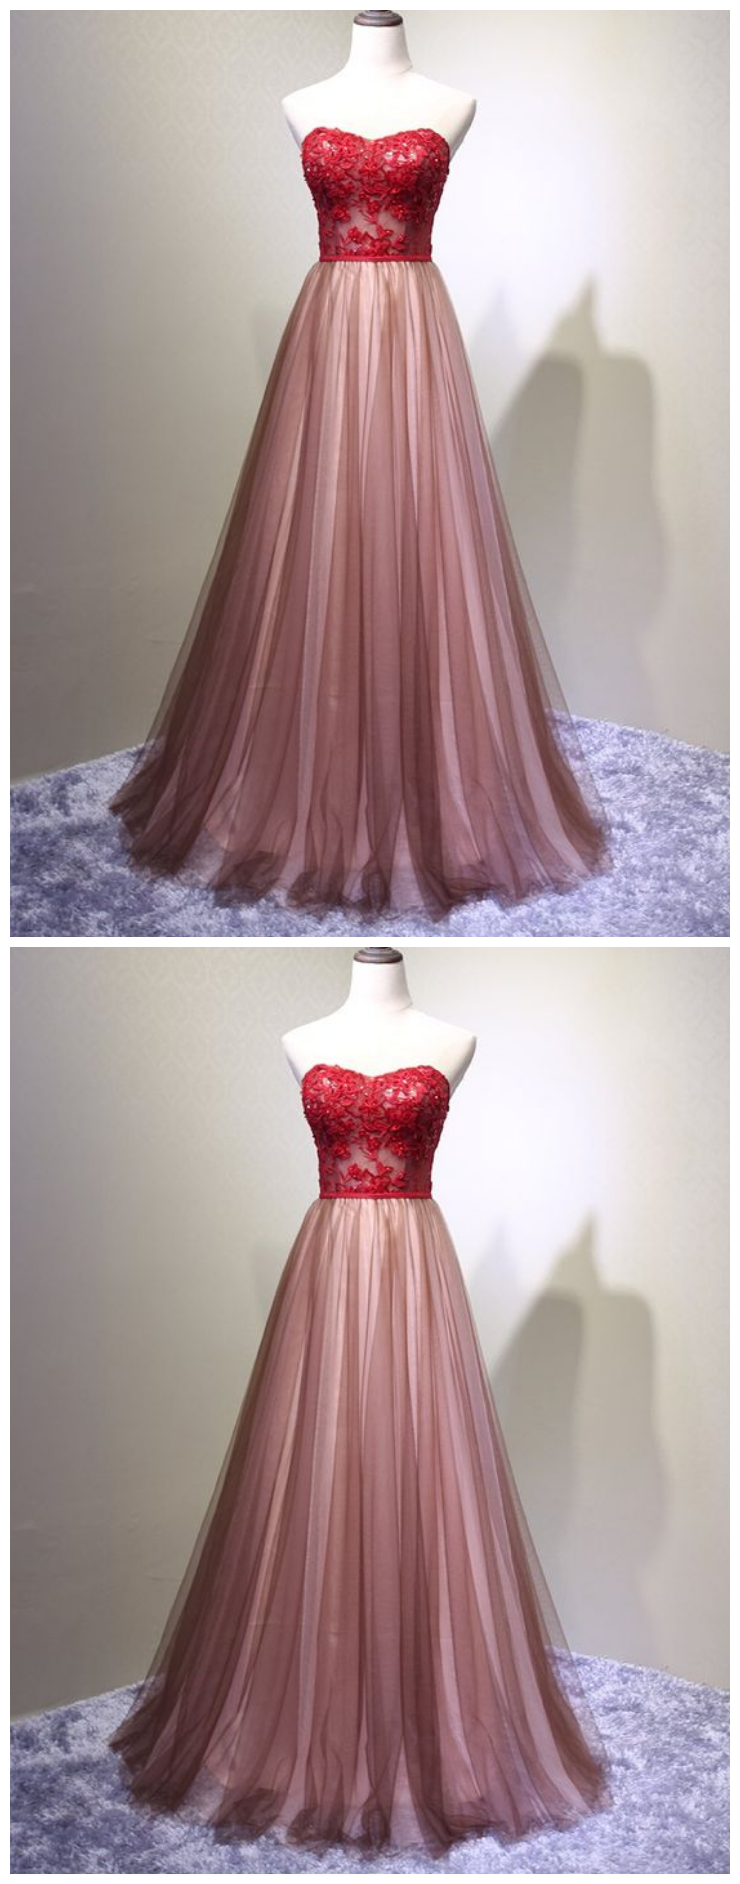 Sweetheart Tulle Prom Dress 2019, Charming Handmade Party Gown, Prom Dress 2019